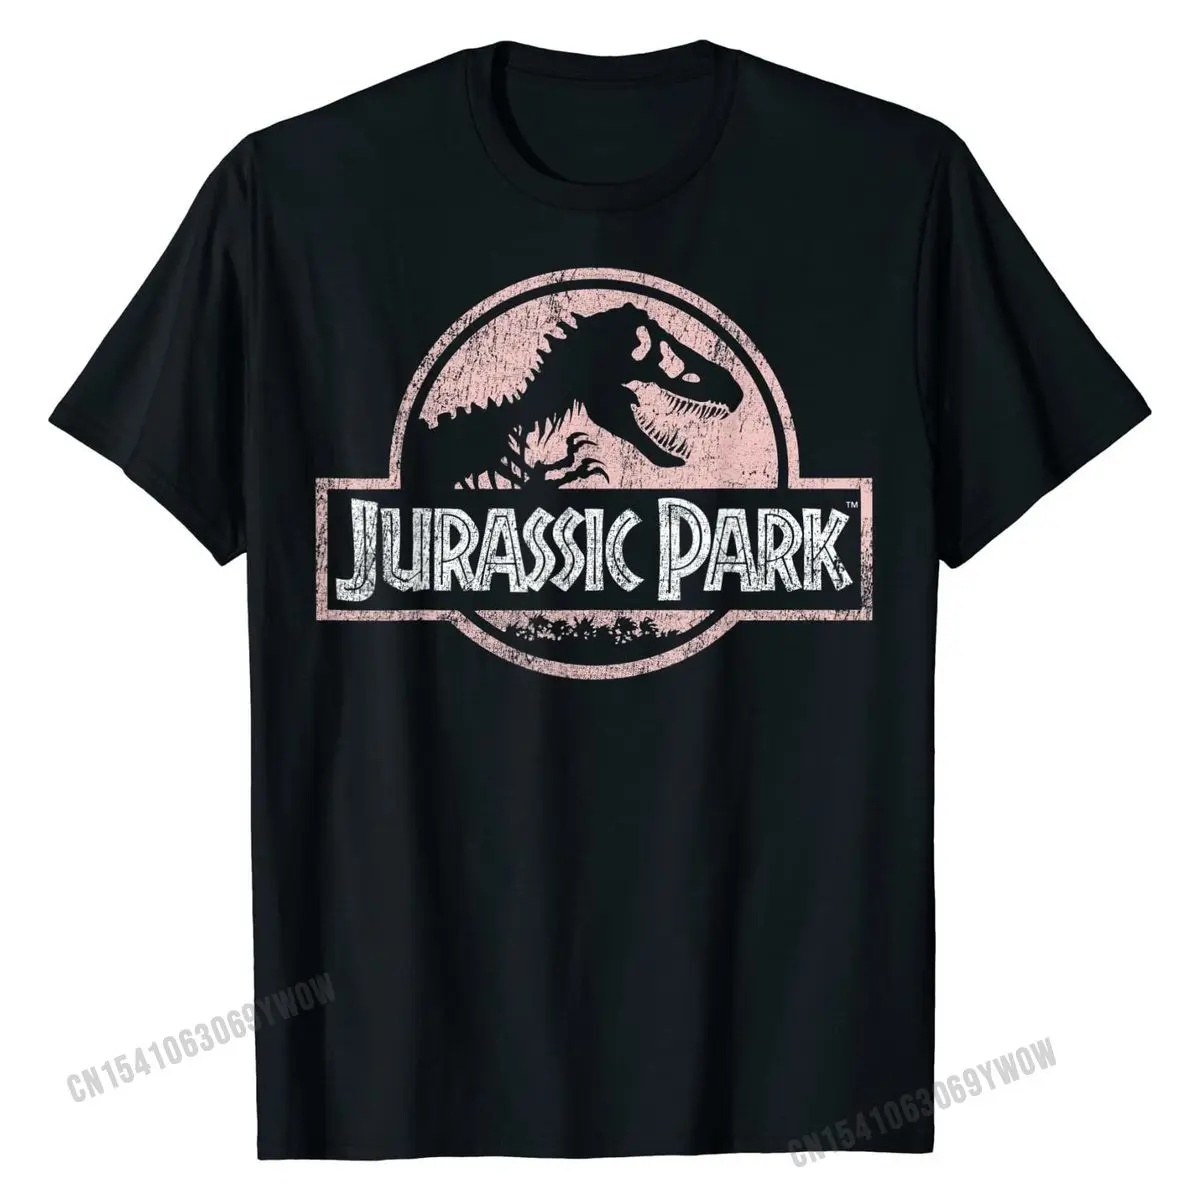 

Jurassic Park Peach Distressed Logo Graphic T-Shirt Normal T Shirt Tops Tees for Male Company Cotton Fashionable Top T-shirts